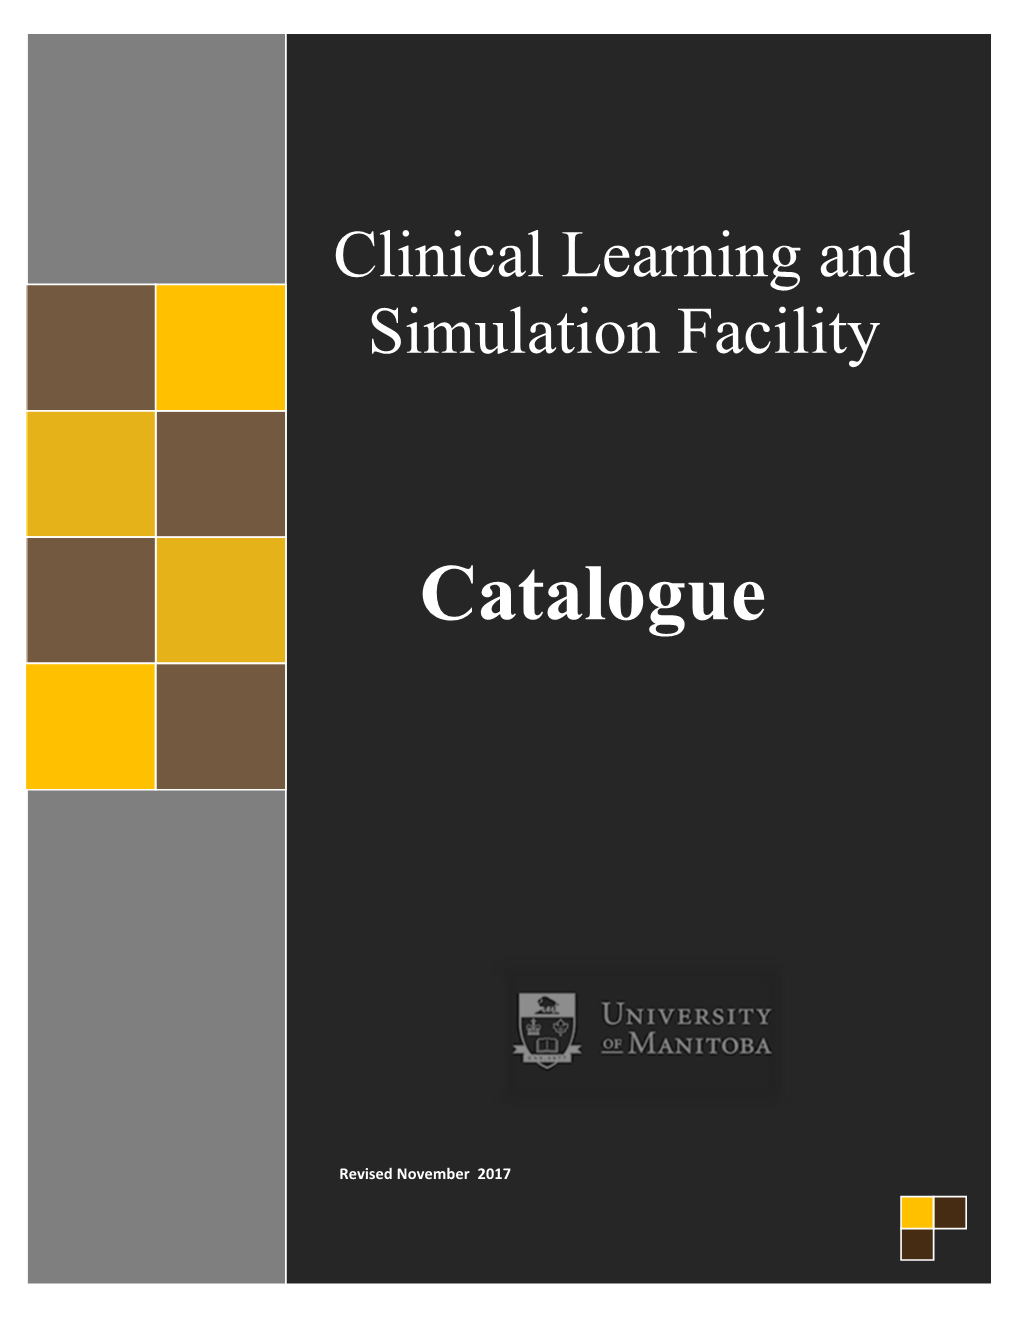 Clinical Learning and Simulation Facility